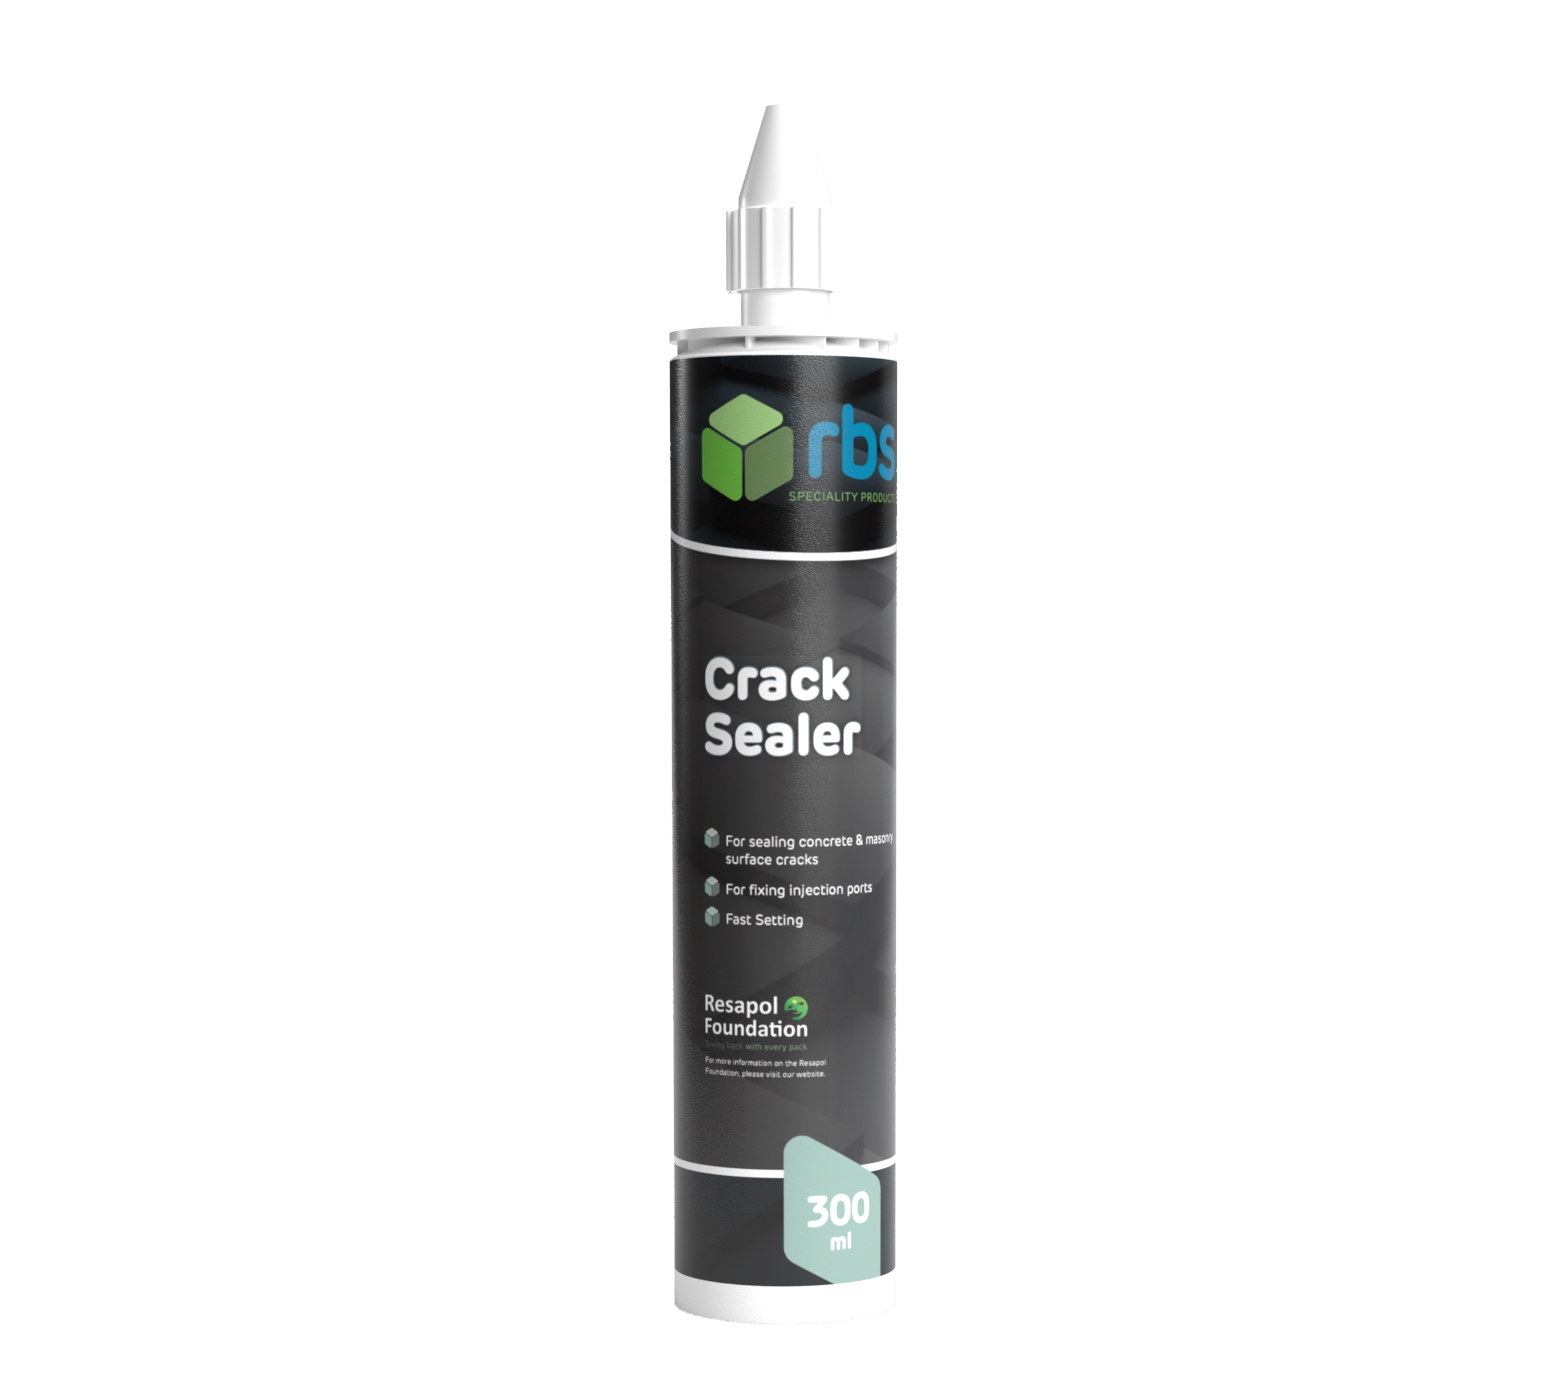 The Crack Sealer component of the rbs Injection Resin LV Kit, which comes in a 300ml tube.